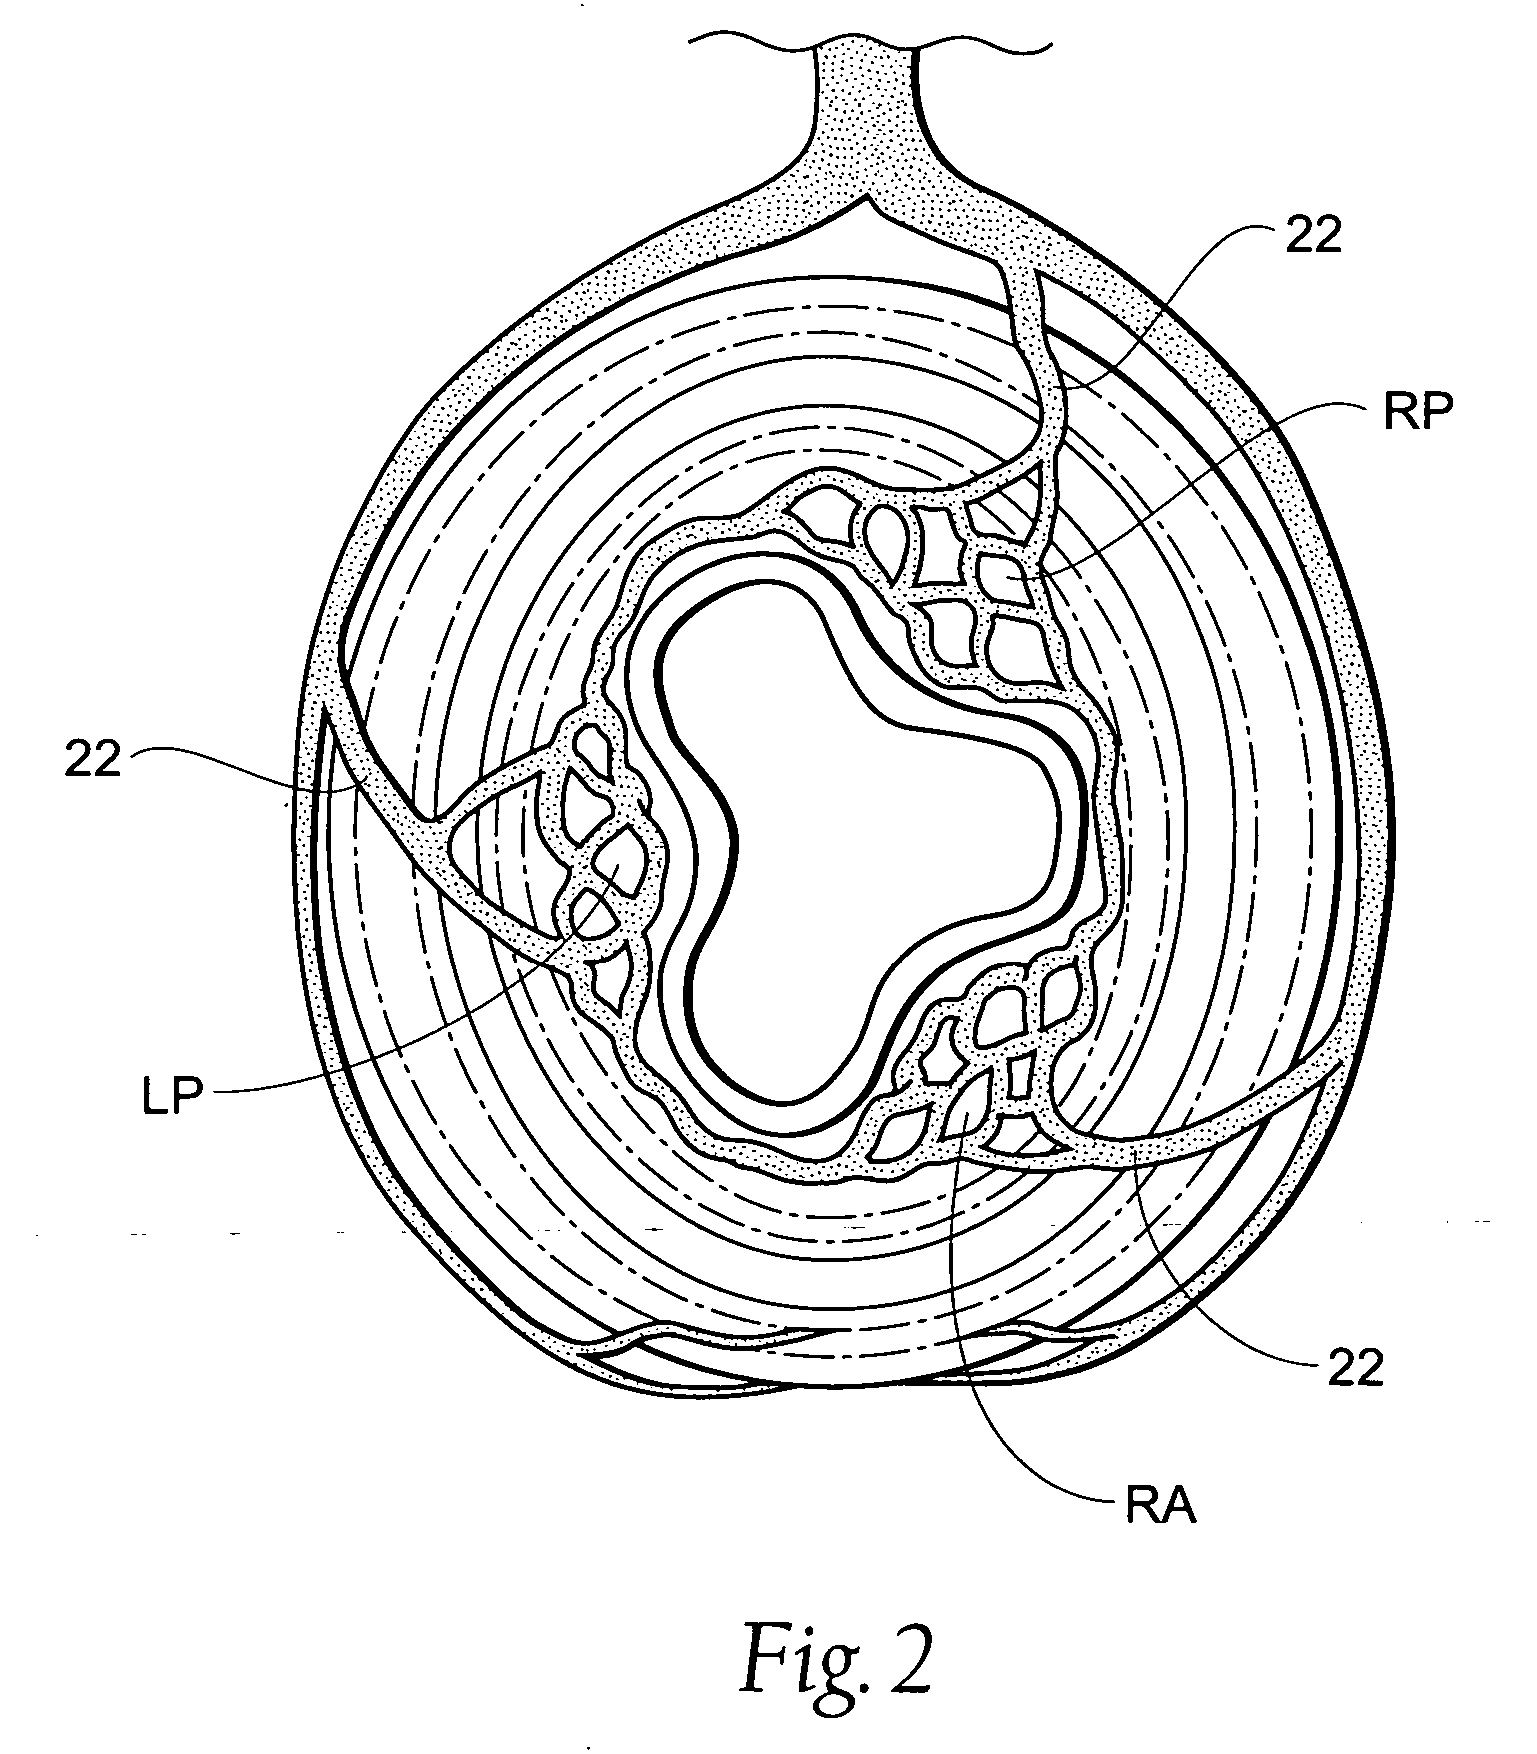 Systems and methods for treating hemorrhoids